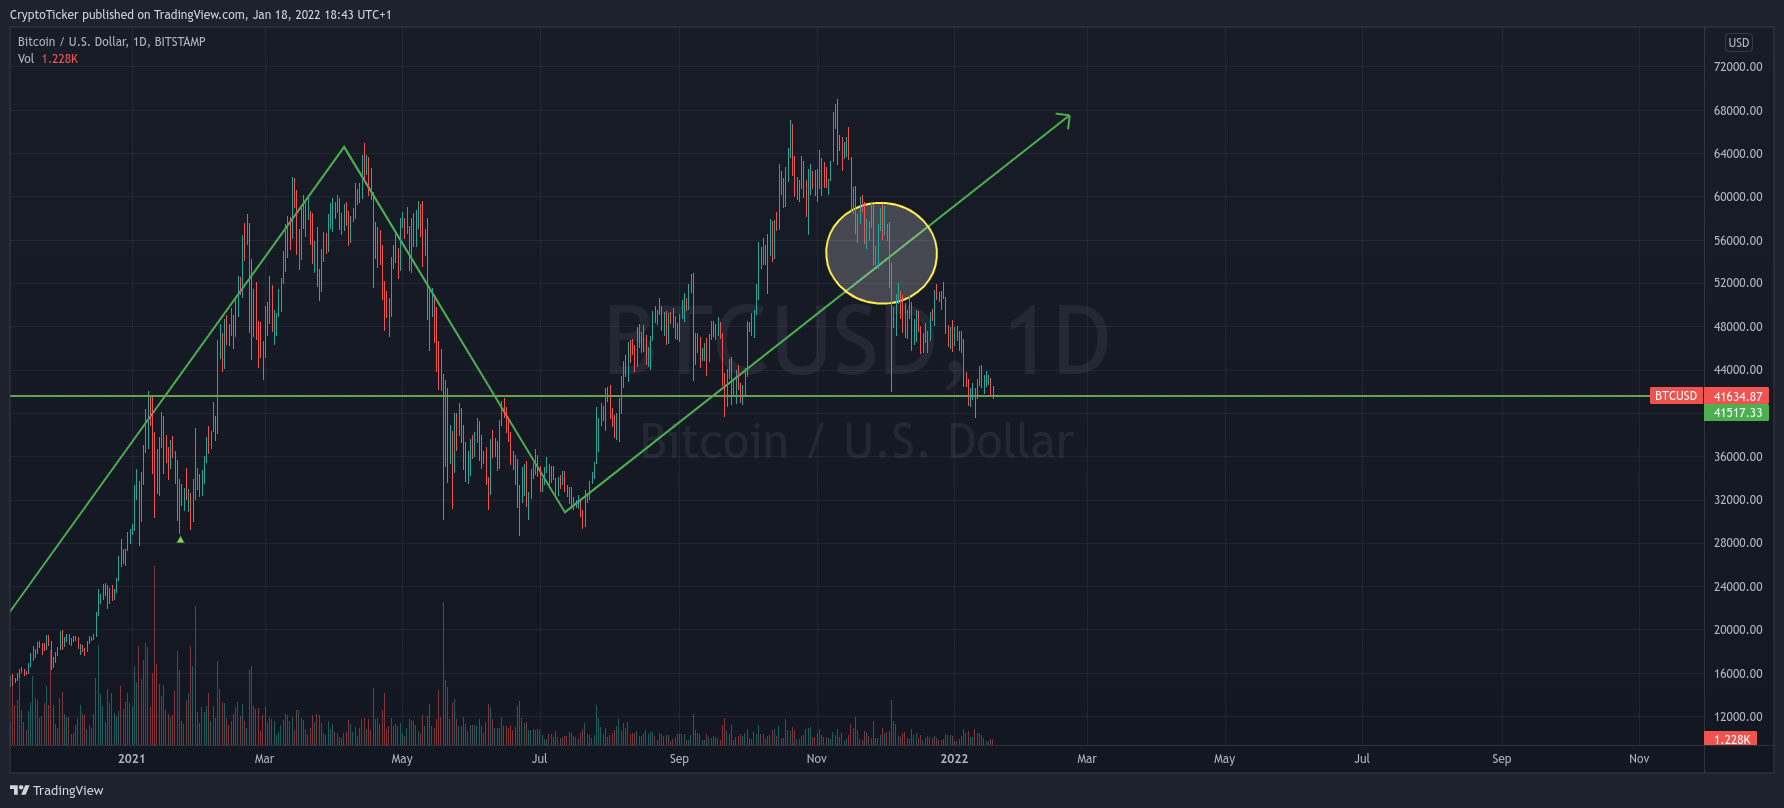 BTC/USD 1-day chart showing the retracement downwards of BTC